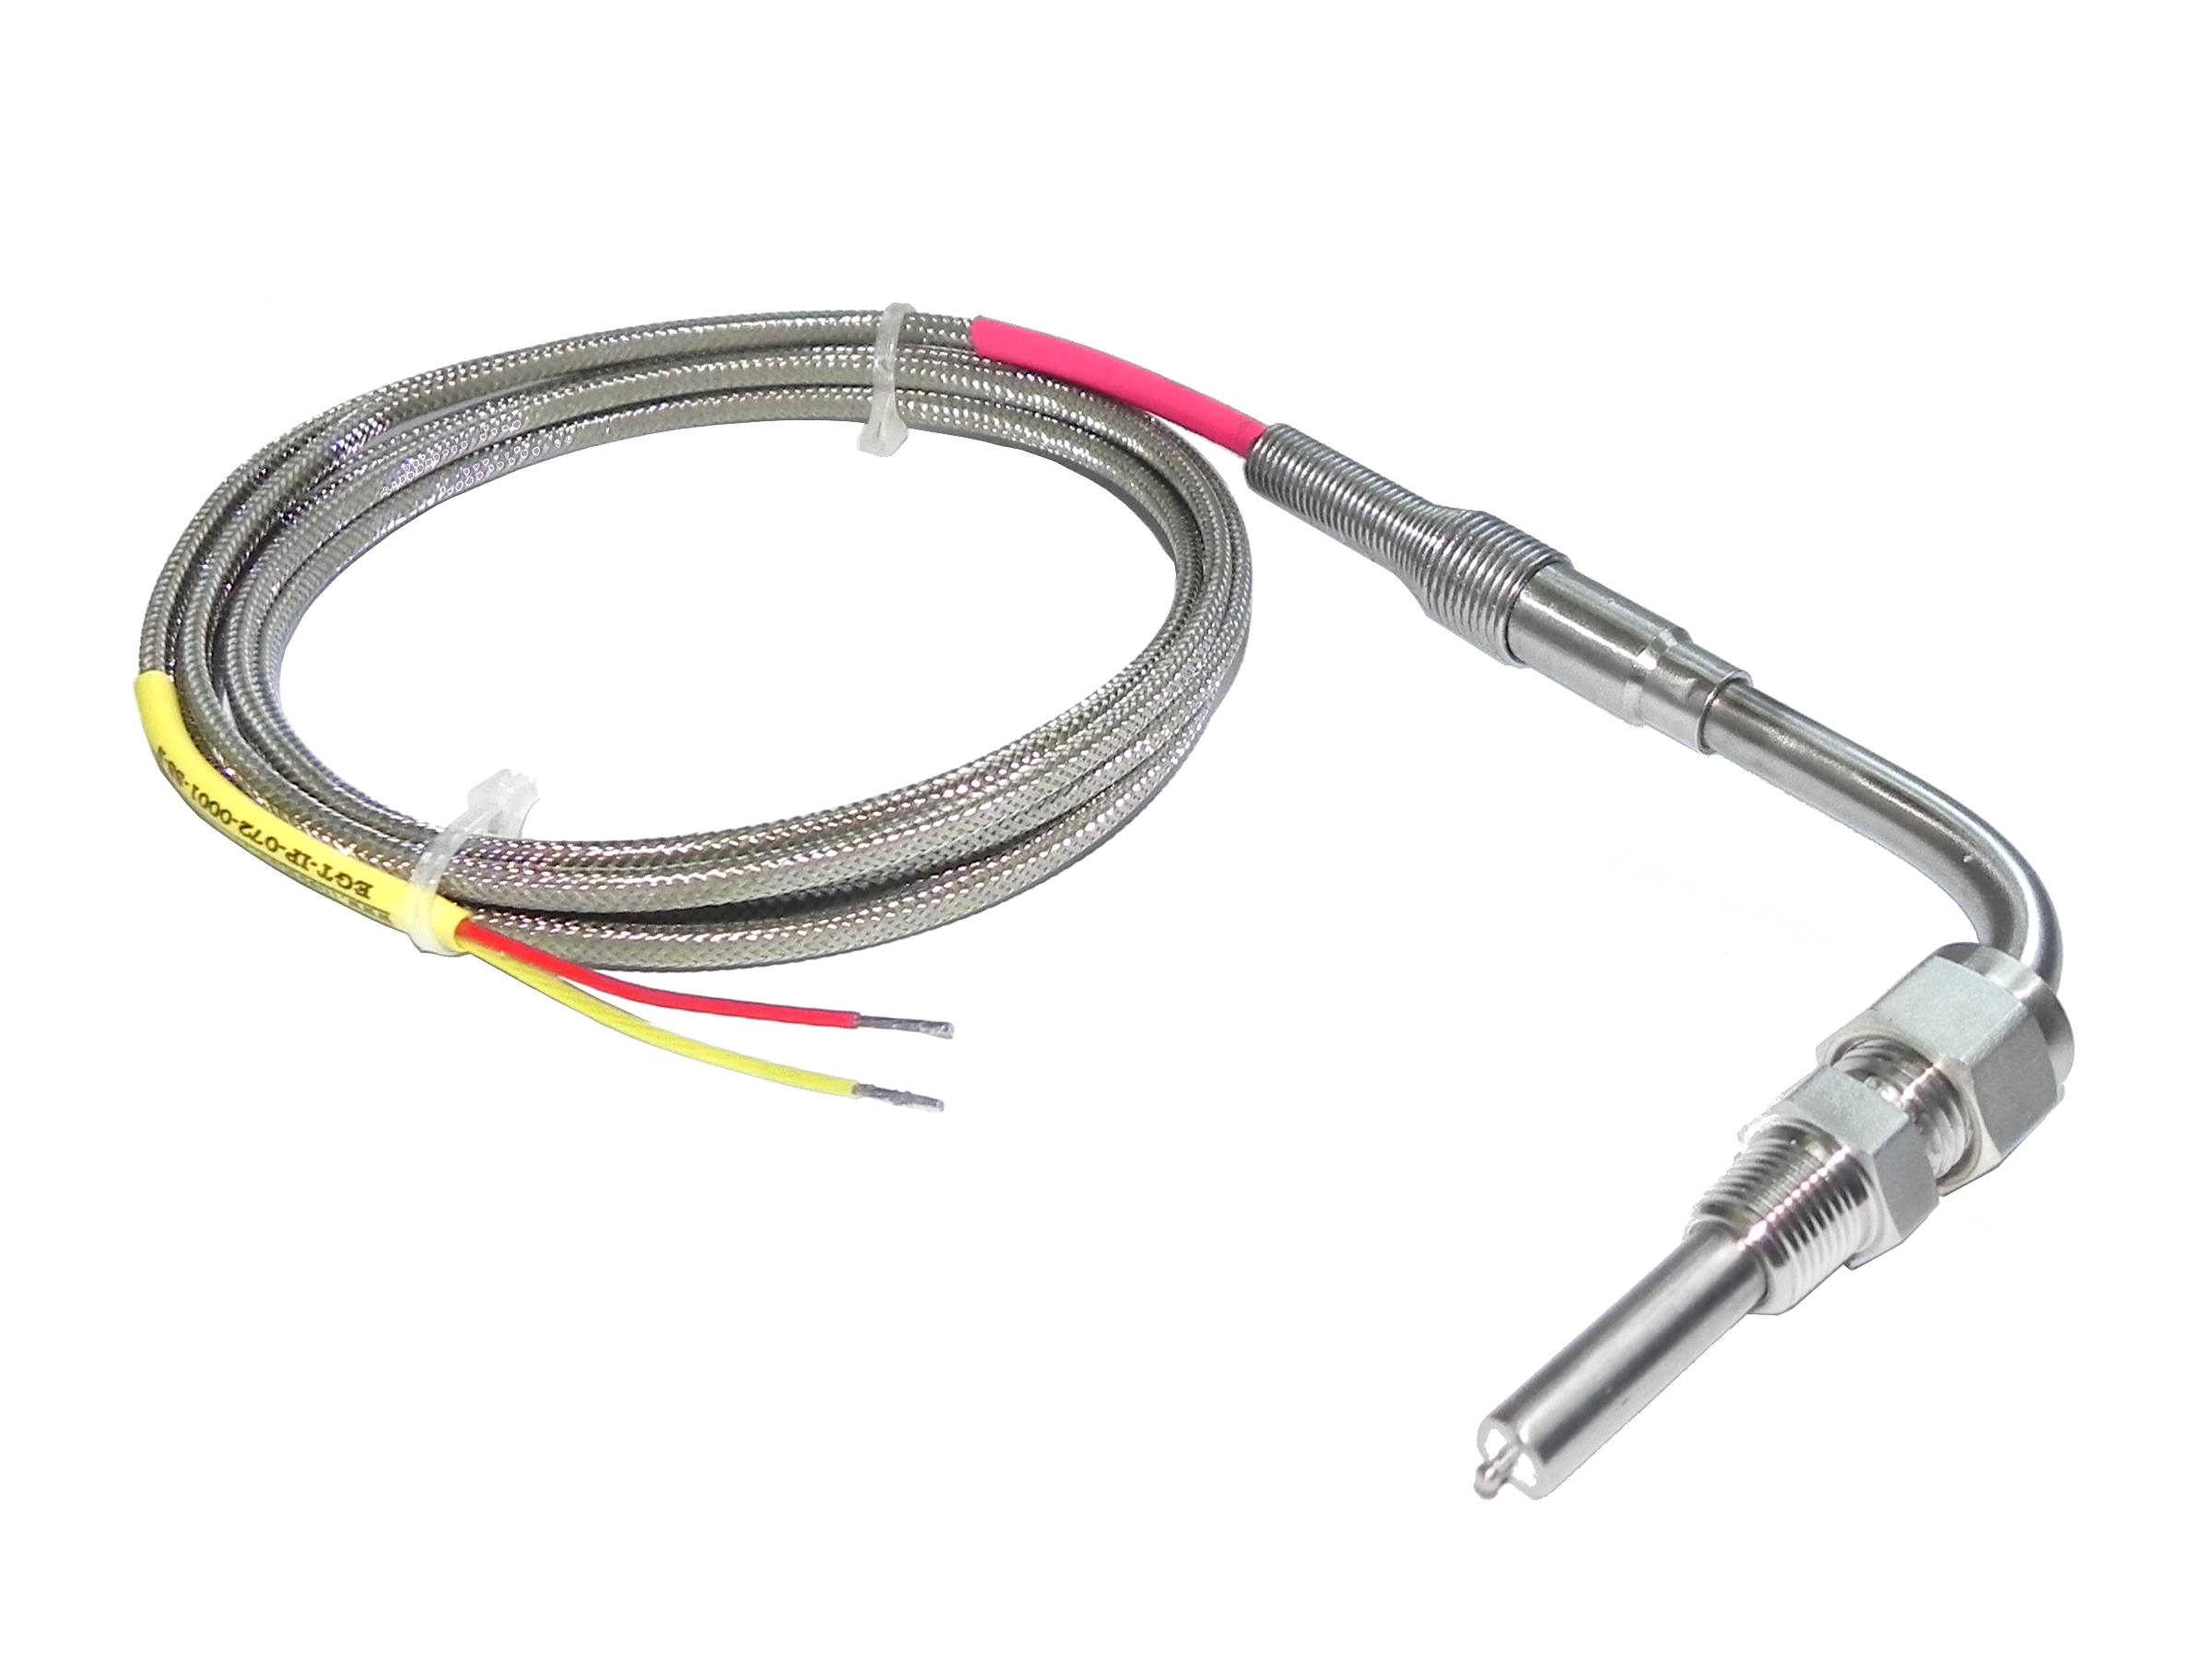 Link G4 Xtreme Wiring Diagram Exhaust Temperature Probe 90 Bend 1 4 O D Link Engine Management